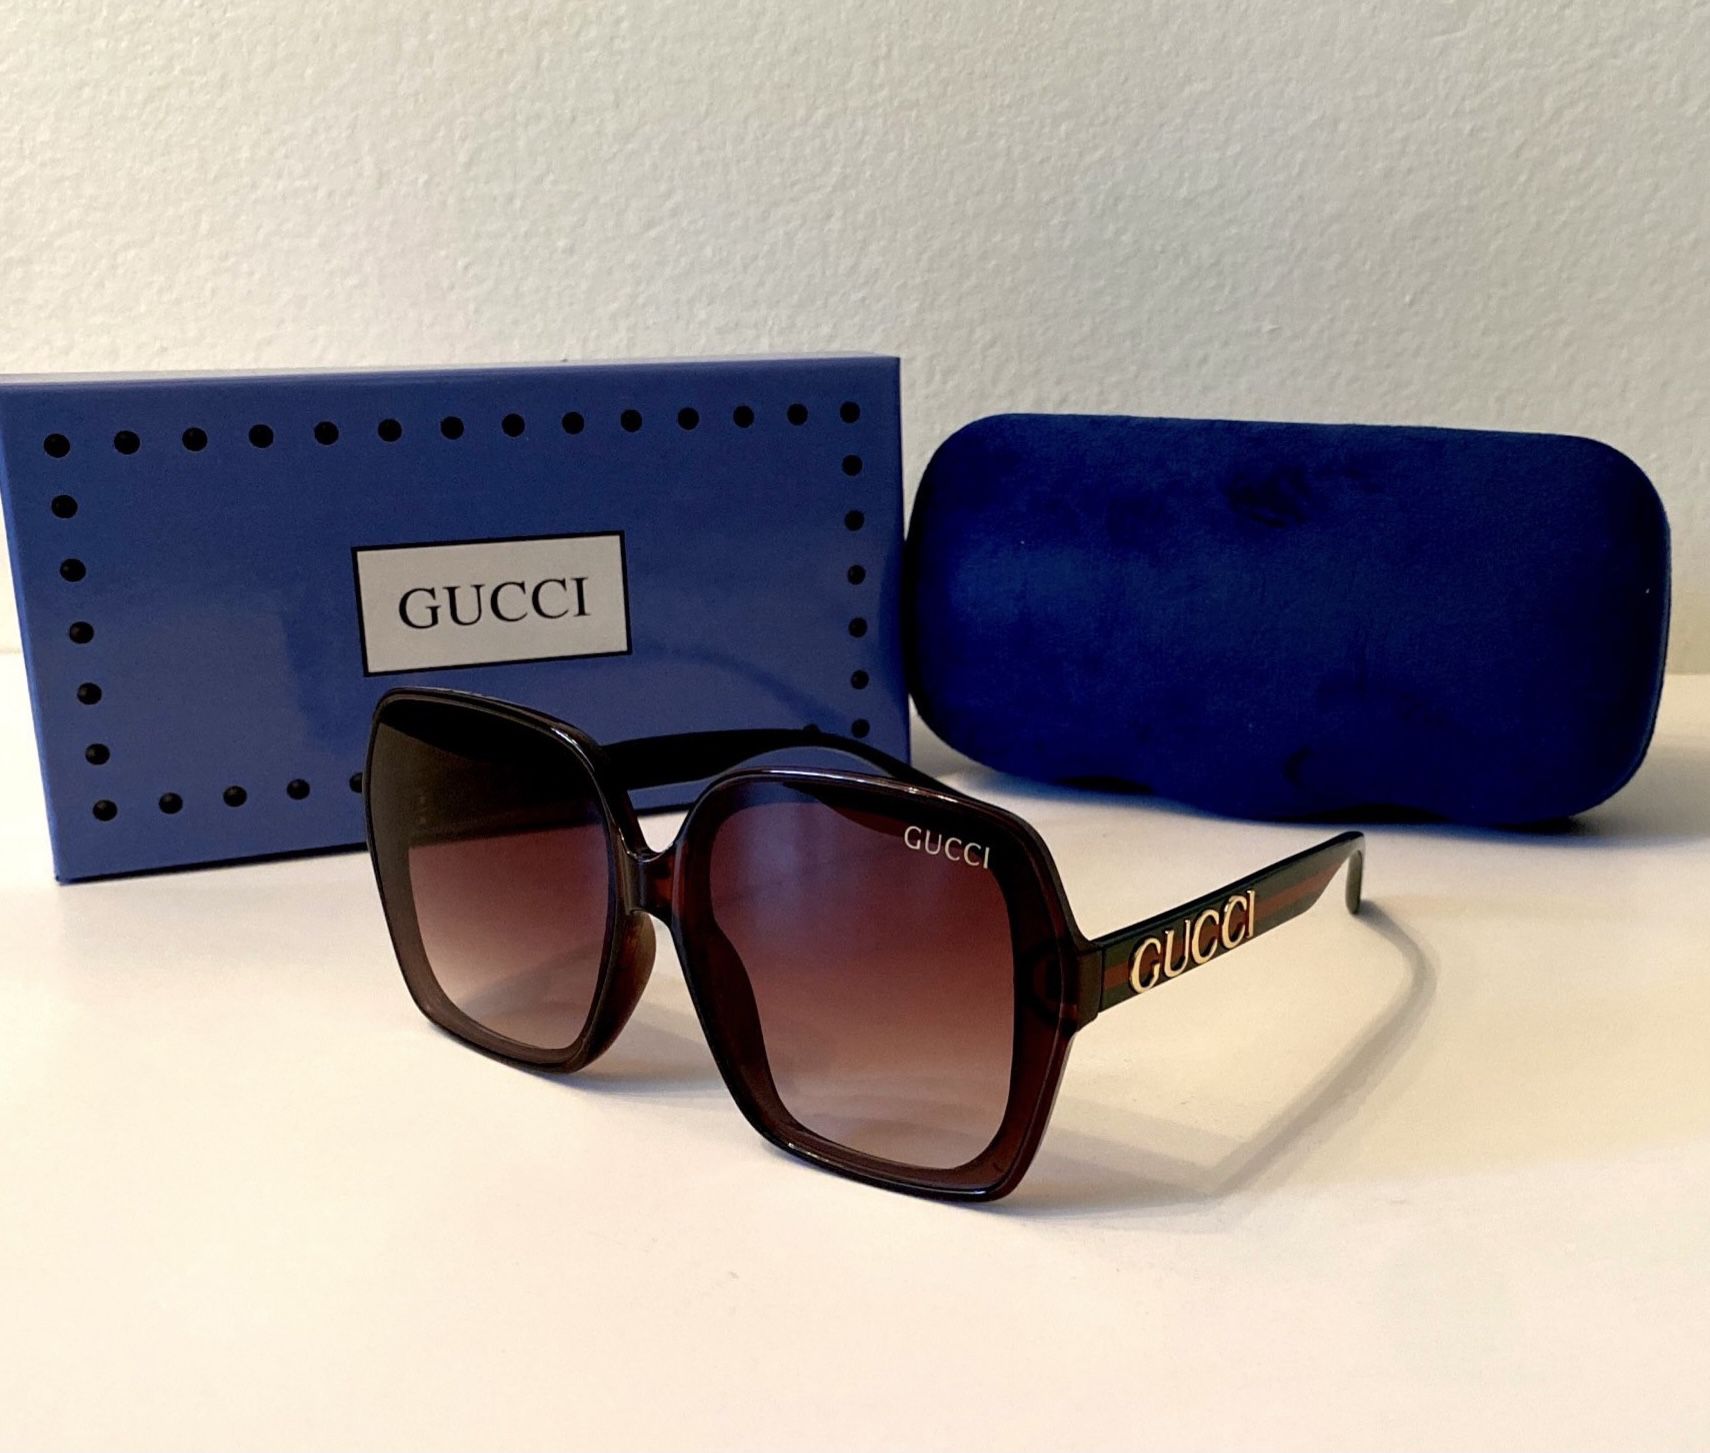 NEW CHANEL SUNGLASSES for Sale in Anaheim, CA - OfferUp